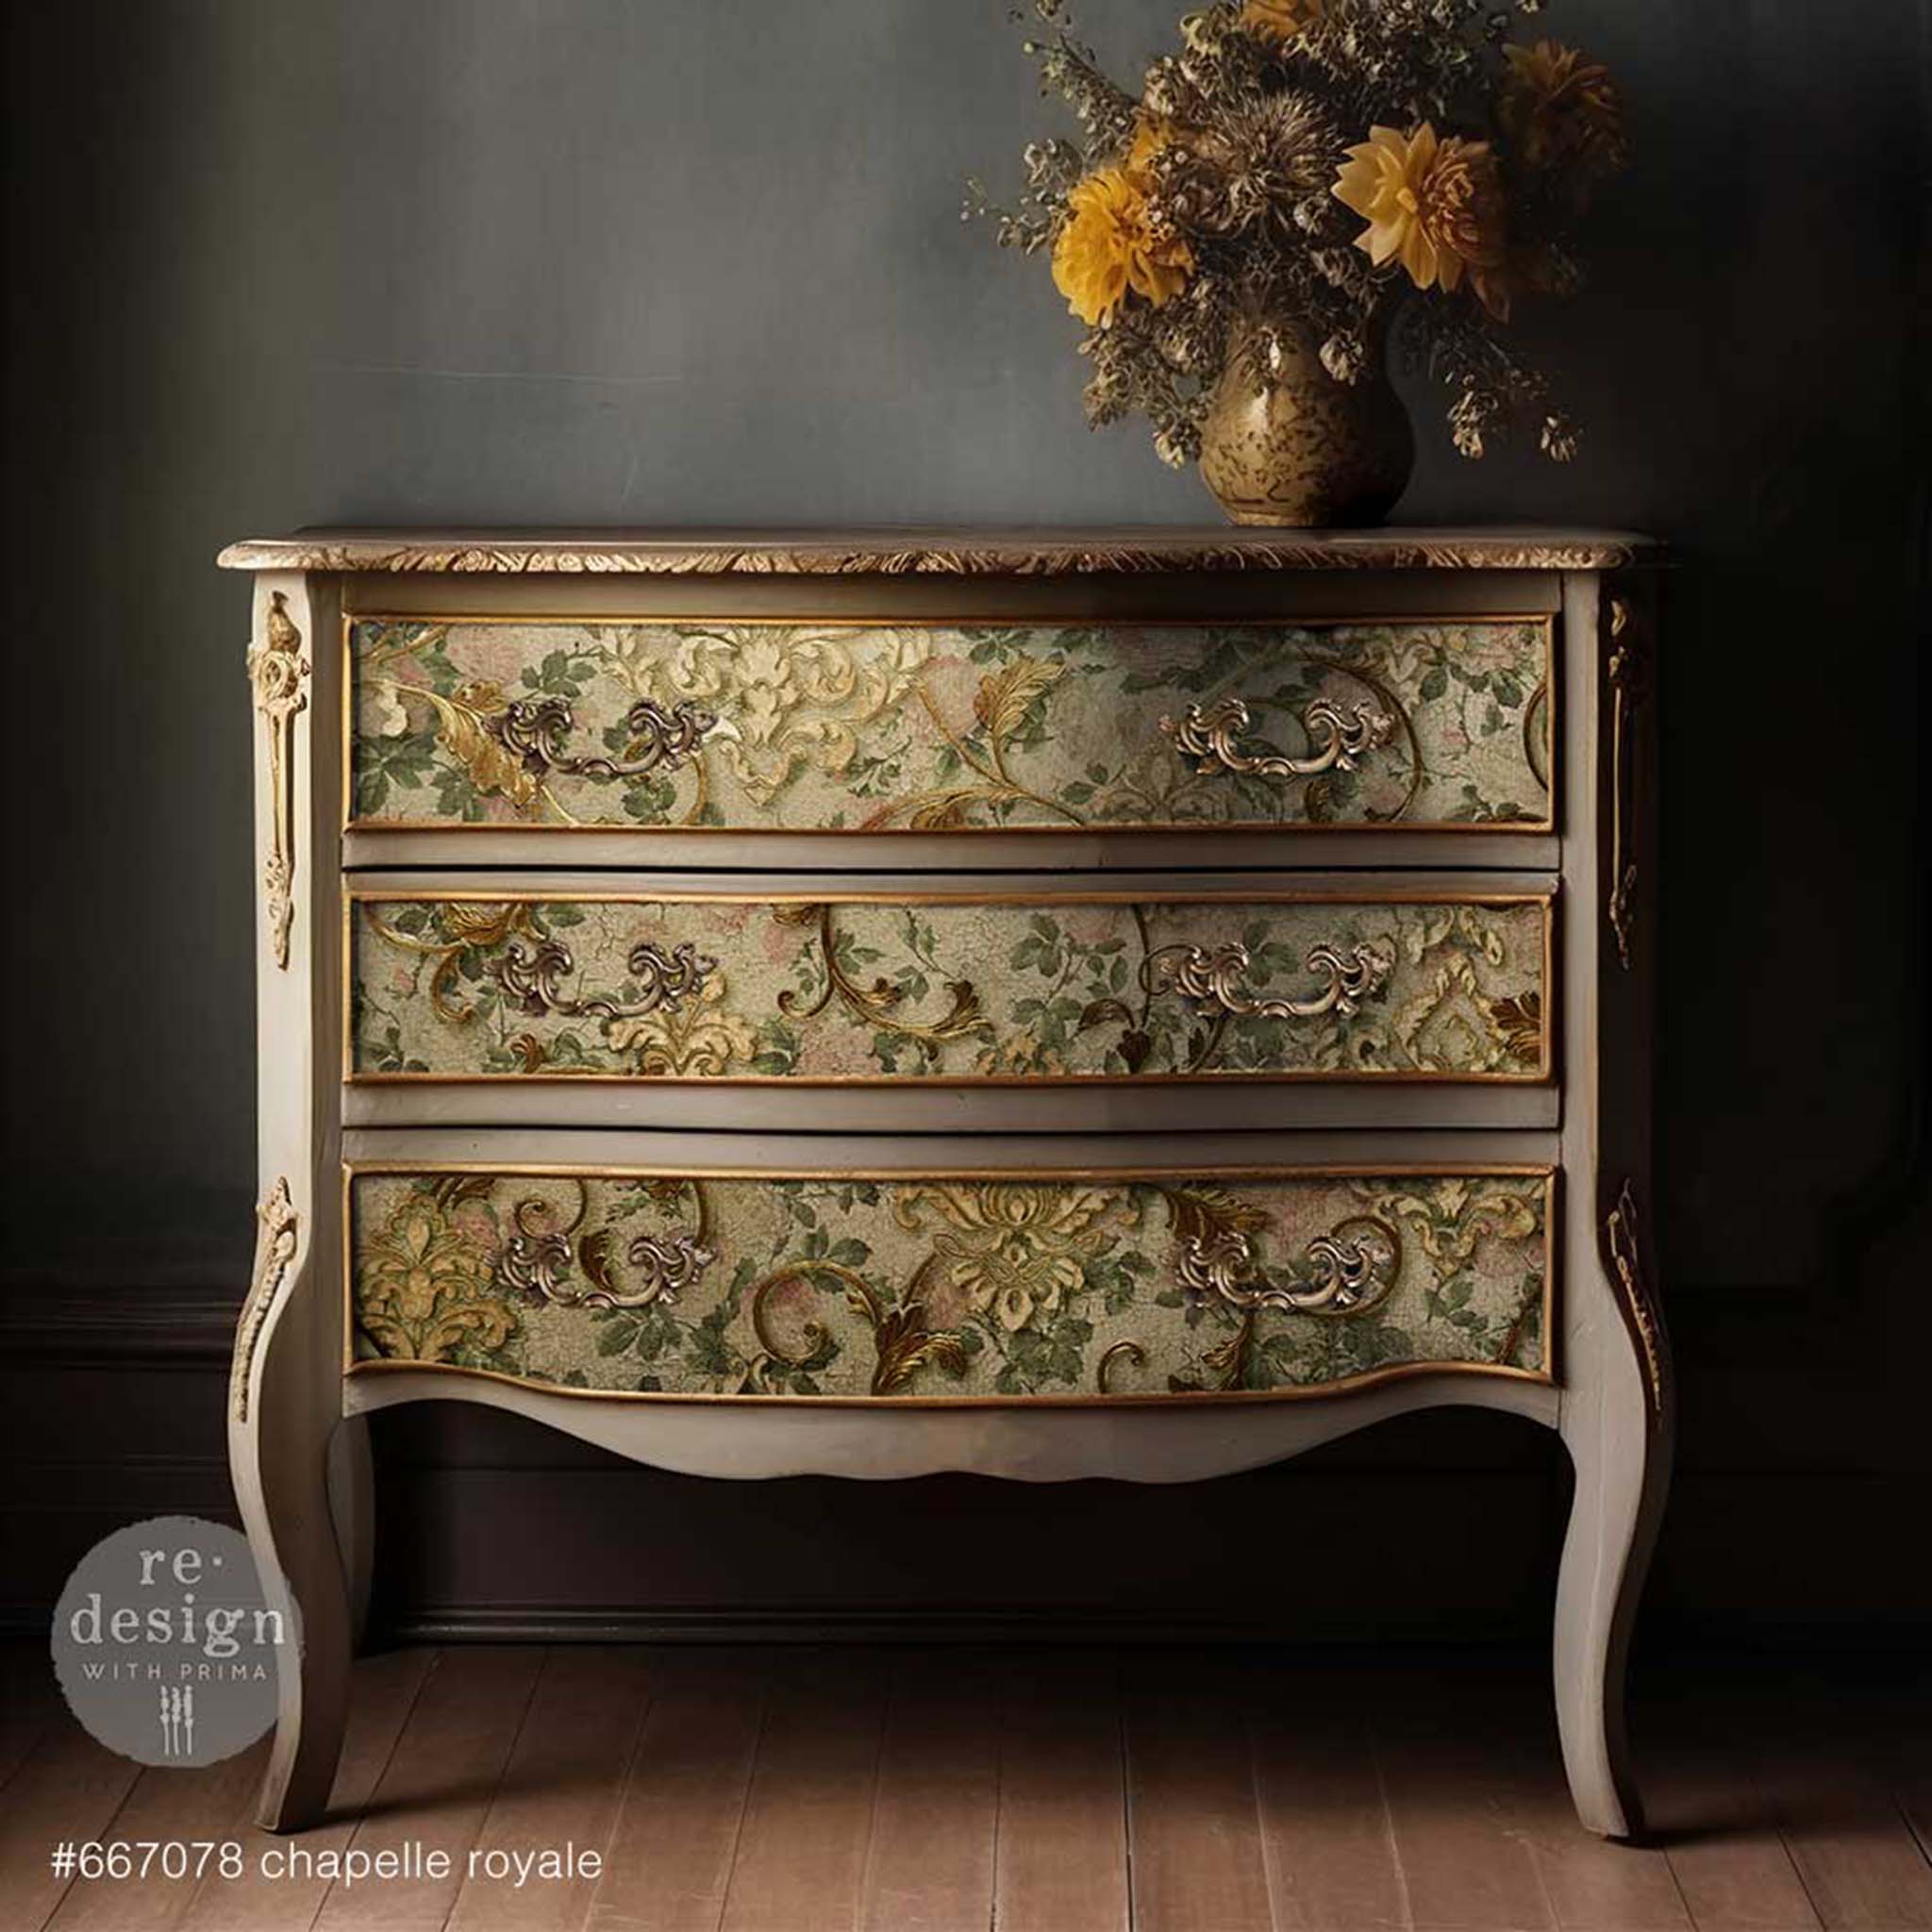 A vintage 3-drawer dresser is painted beige with bronze accents and features ReDesign with Prima's Chapelle Royale tissue paper on the drawers.